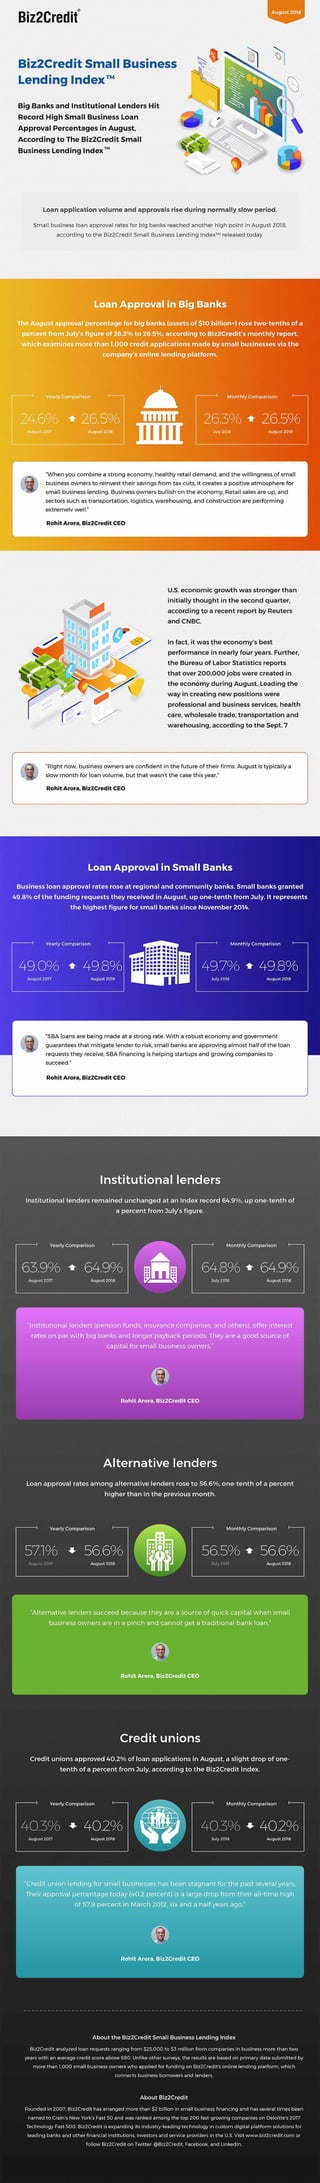 Small Business Lending Index August 2018